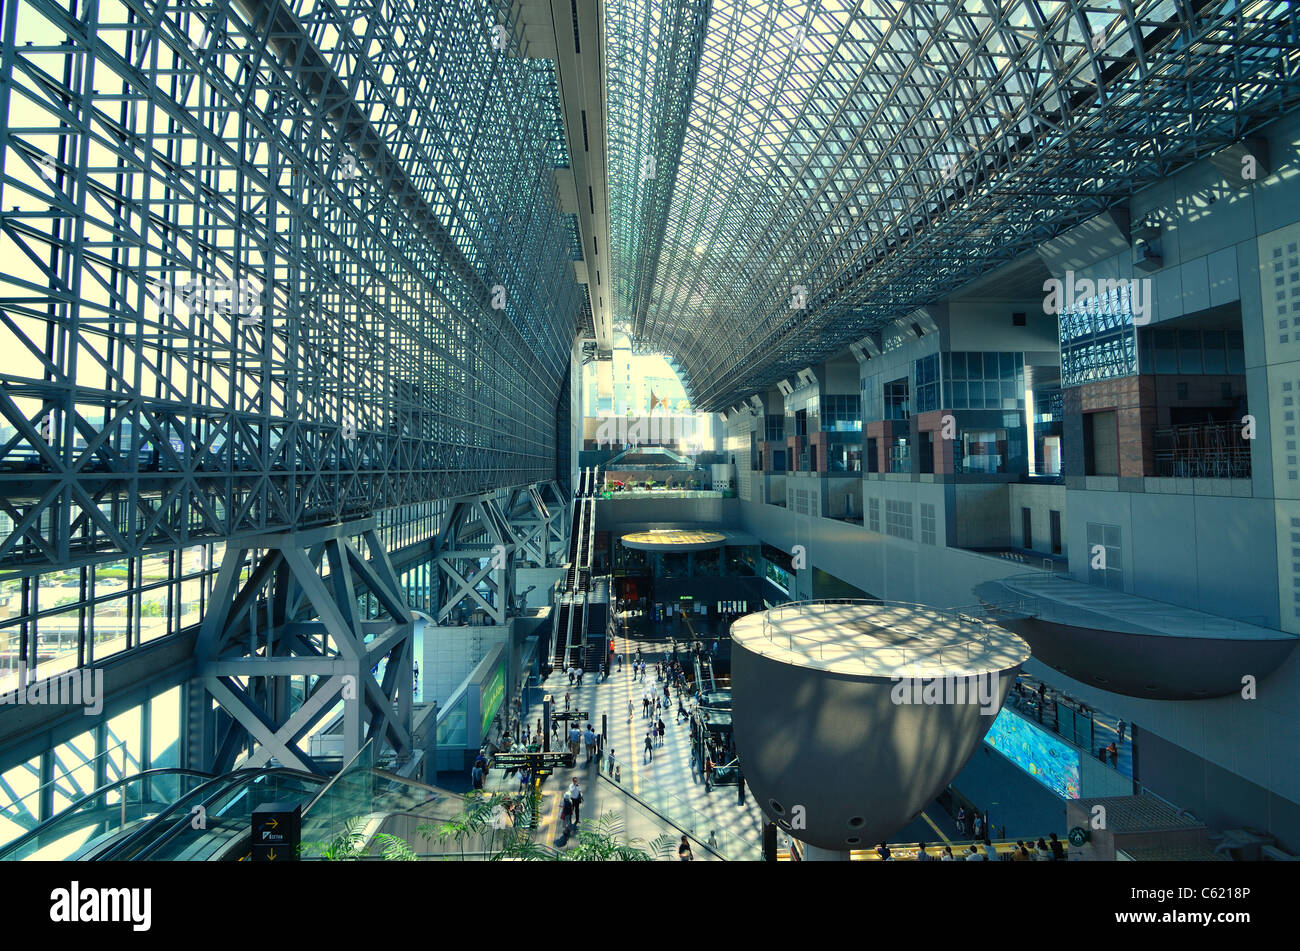 Kyoto station is the second largest train hub in Japan and is one of the country's largest buildings. Stock Photo